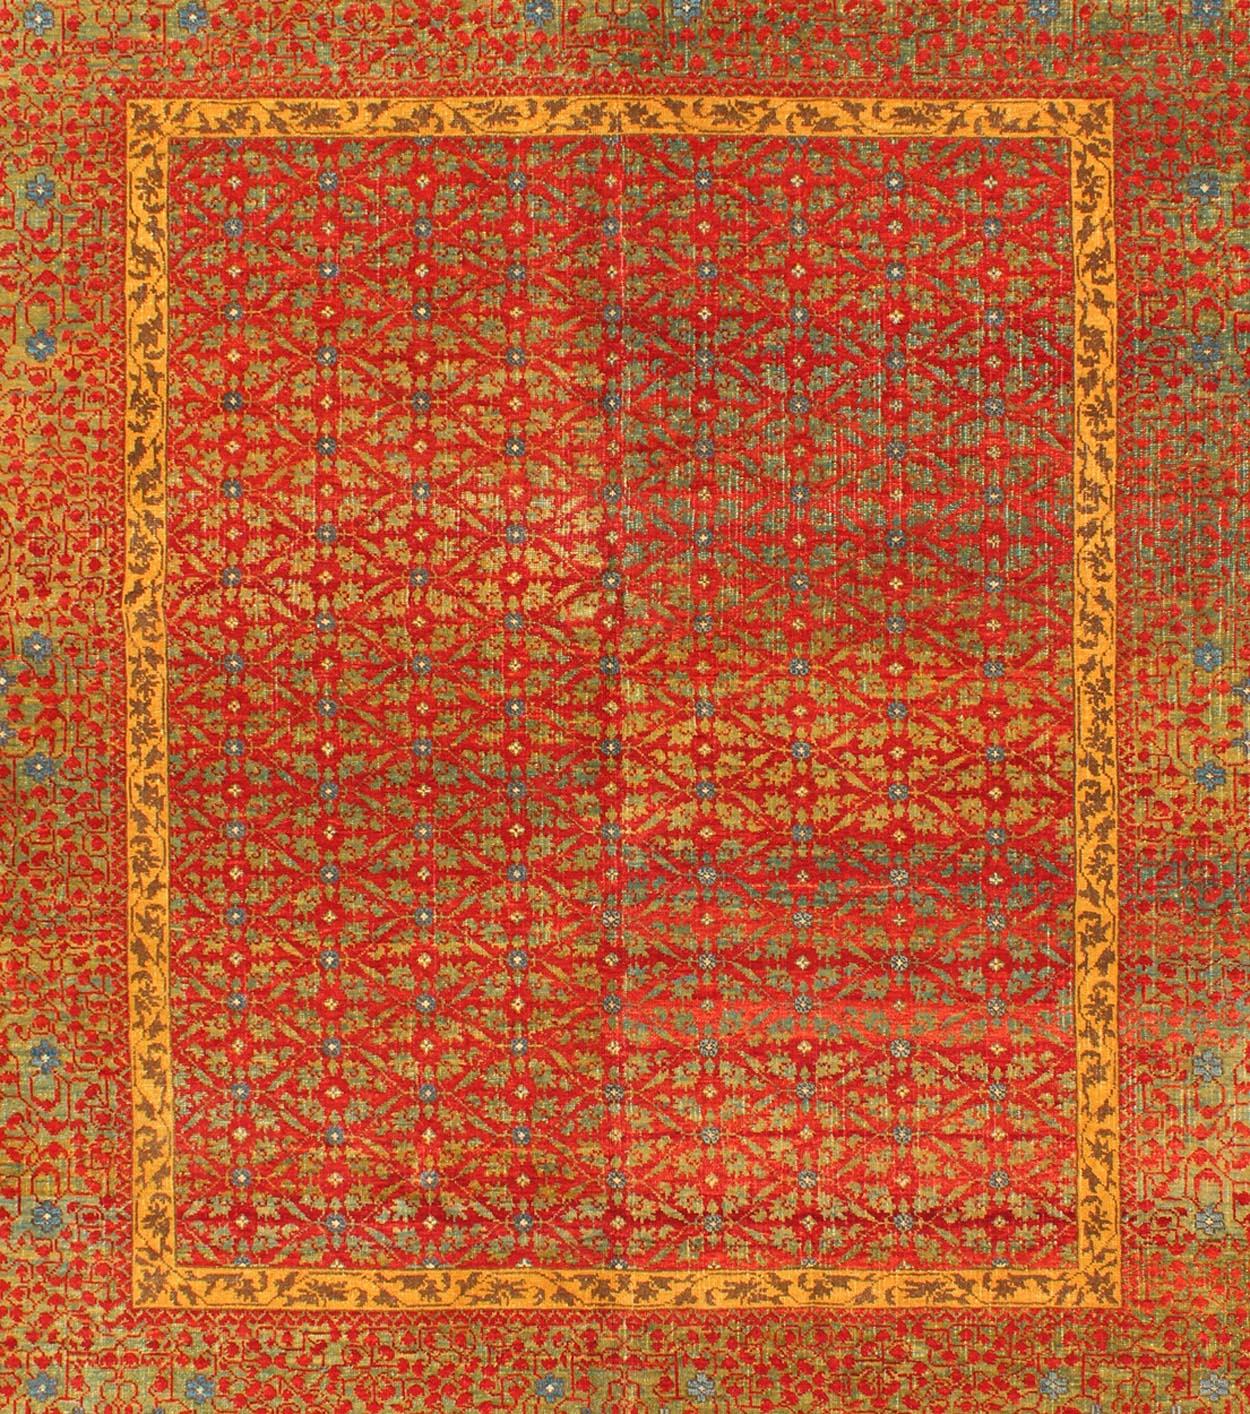 Turkish Square Sized Vintage Ottoman Rug with Repeating All-Over Design